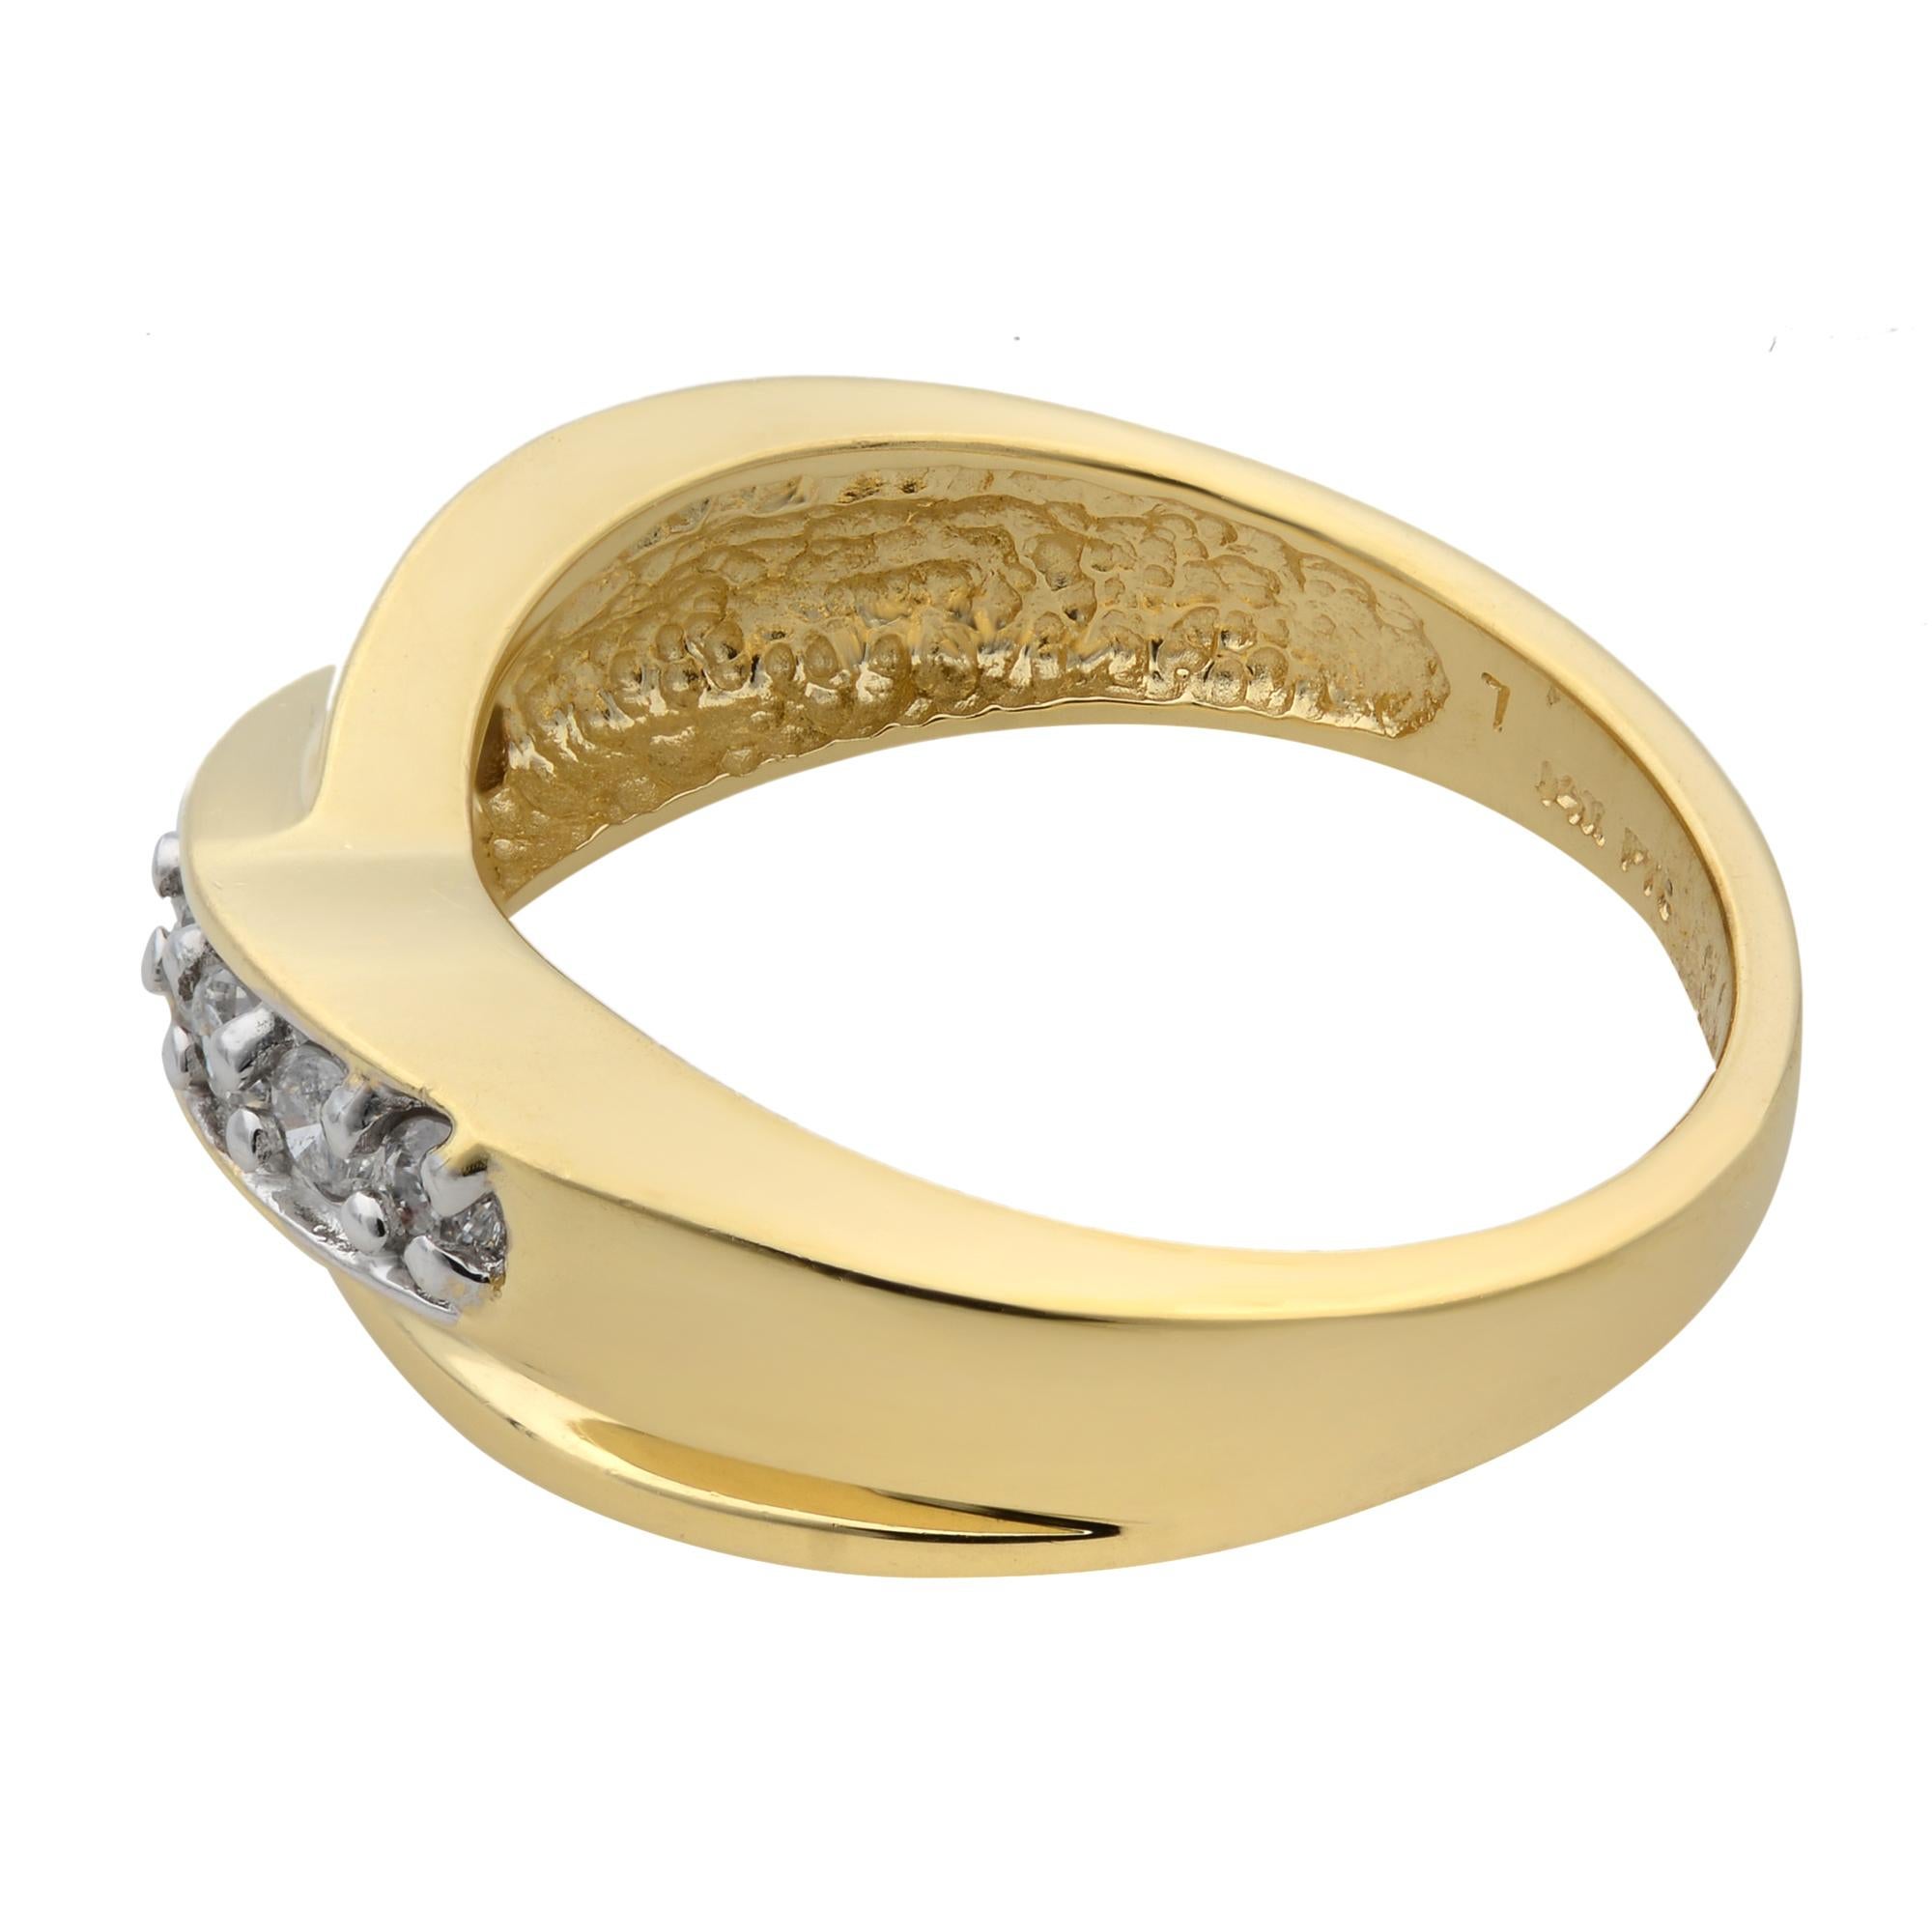 This beautiful crisscross band ring is crafted in 14k yellow gold and encrusted with round brilliant cut diamonds weighing 0.25 carats. Diamond quality: color H and clarity SI-I. Ring size: 7. Band width: 6.5mm. Total weight: 5.22 grams. Great